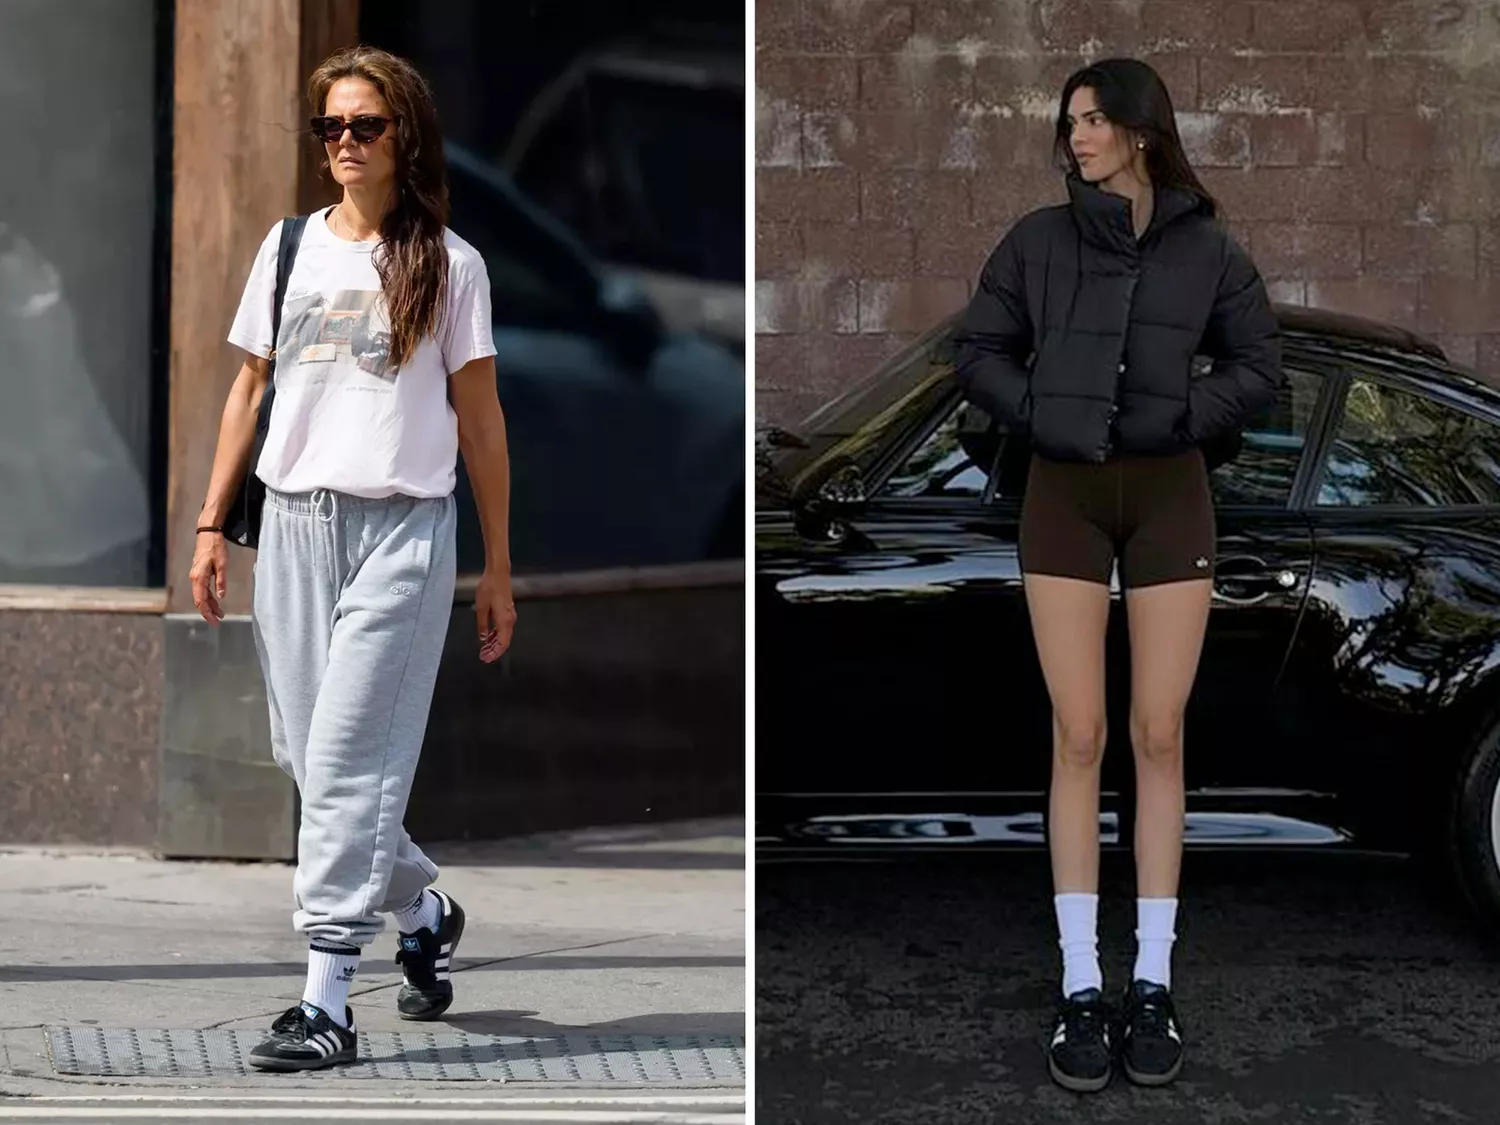 Kendall Jenner and Katie Holmes Alo Yoga